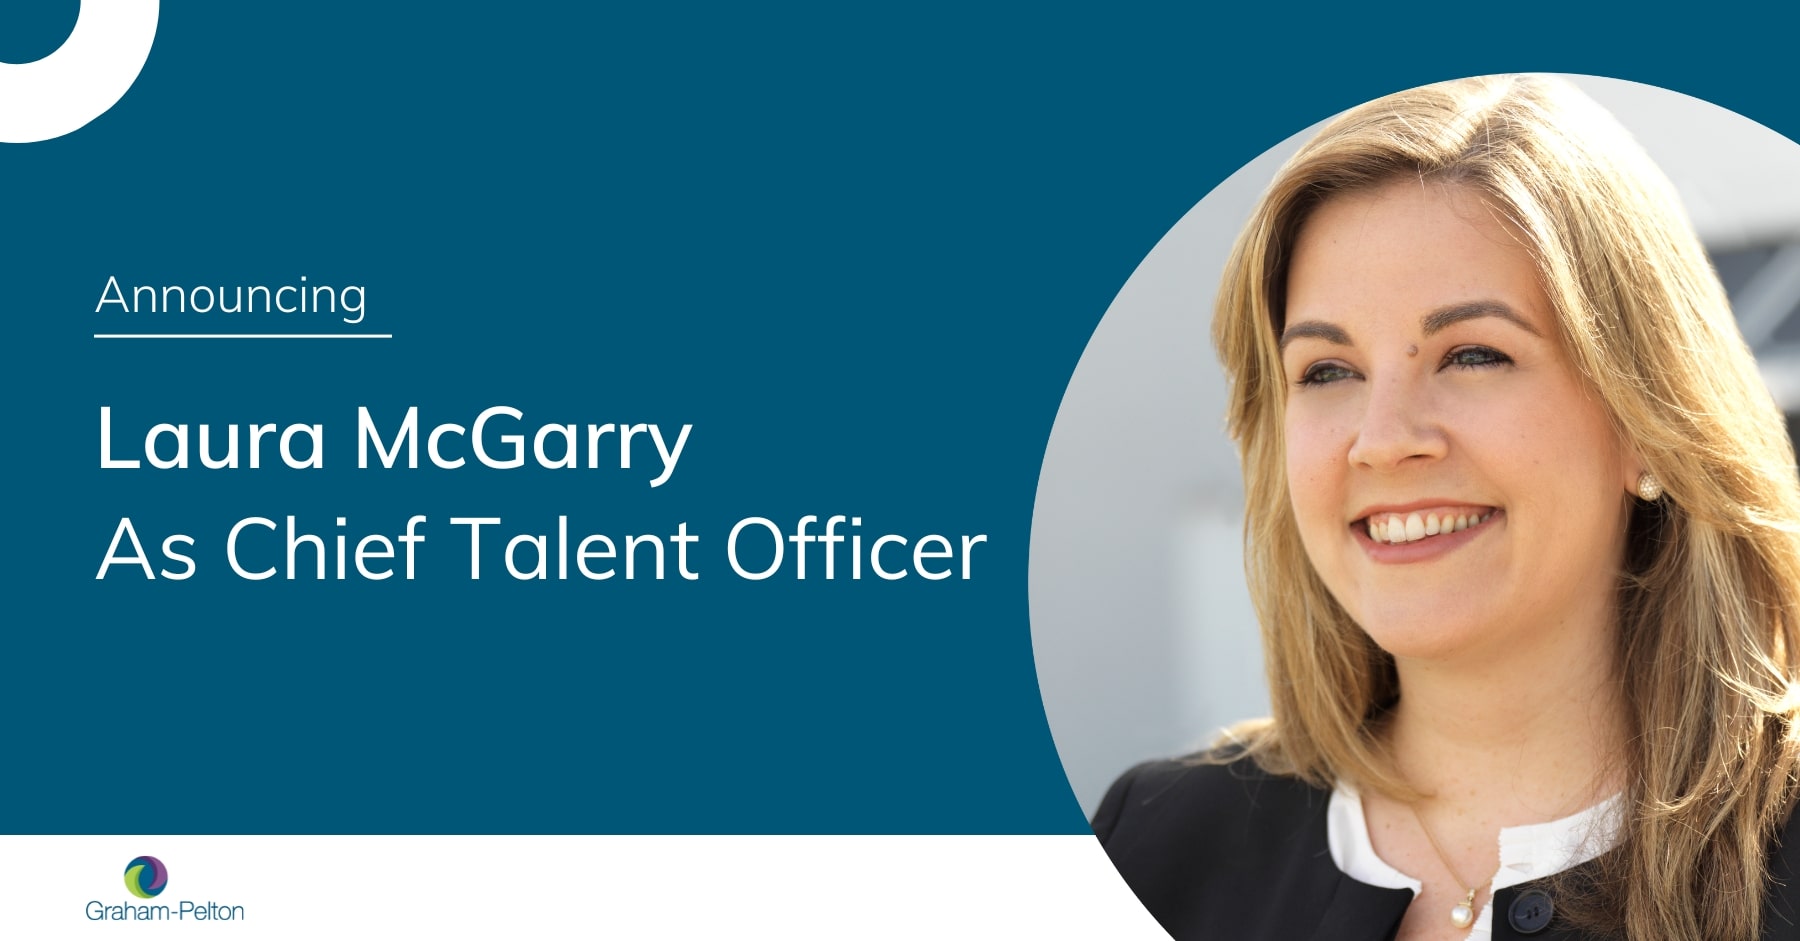 Graphic announcing Laura McGarry's new role as Chief Talent Officer